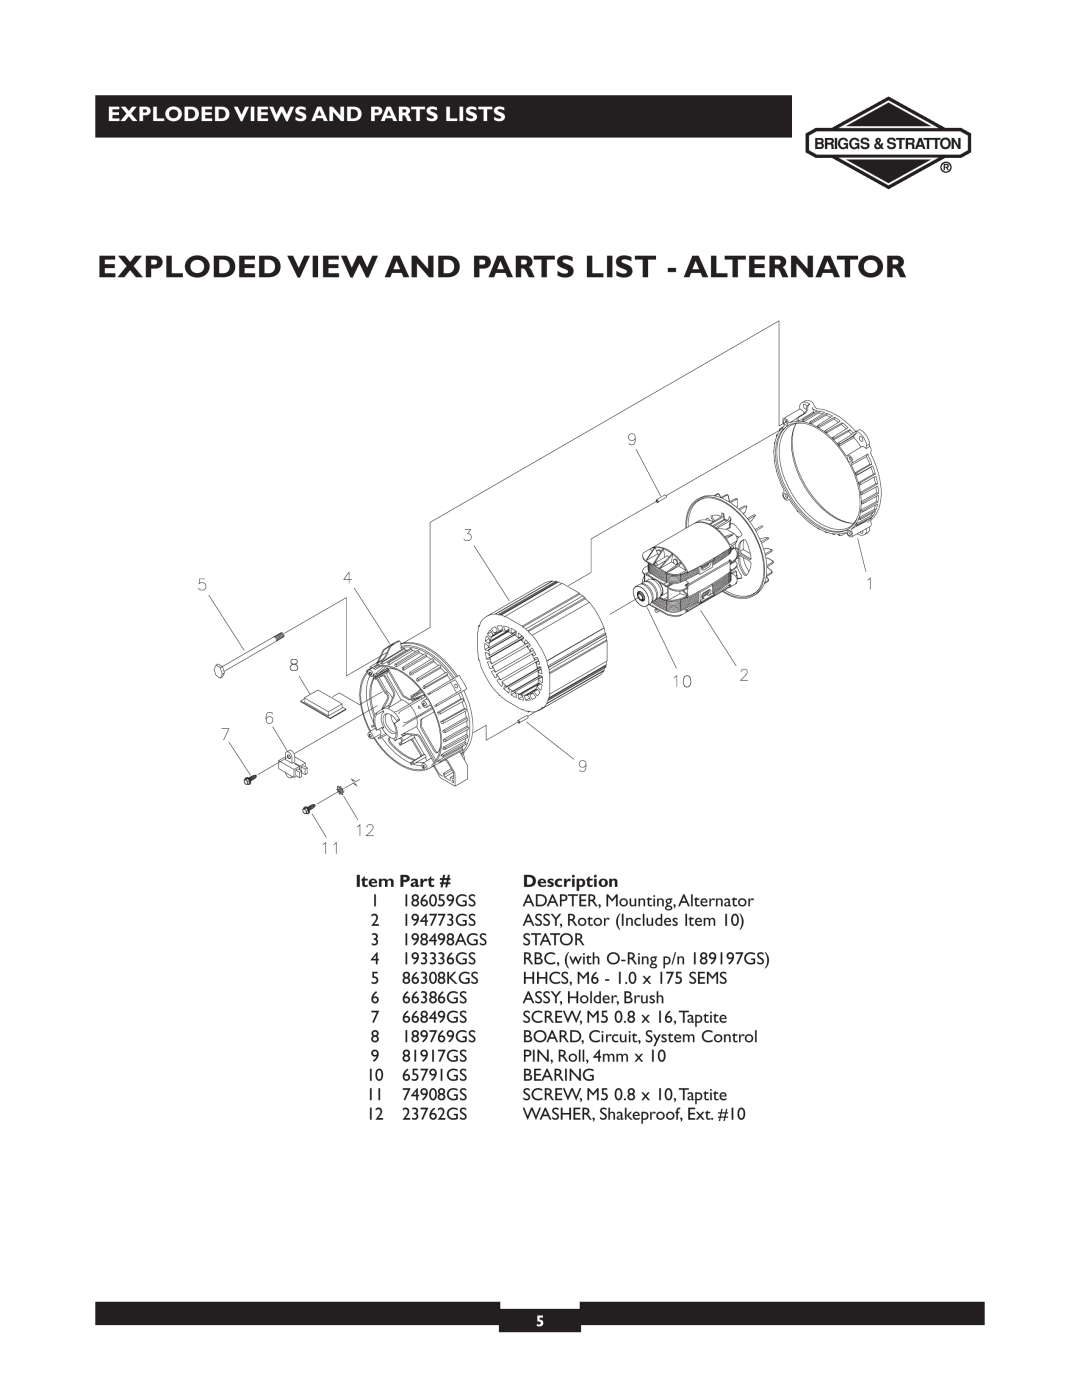 Briggs & Stratton 30244 manual Exploded View And Parts List - Alternator, Exploded Views And Parts Lists, Description 